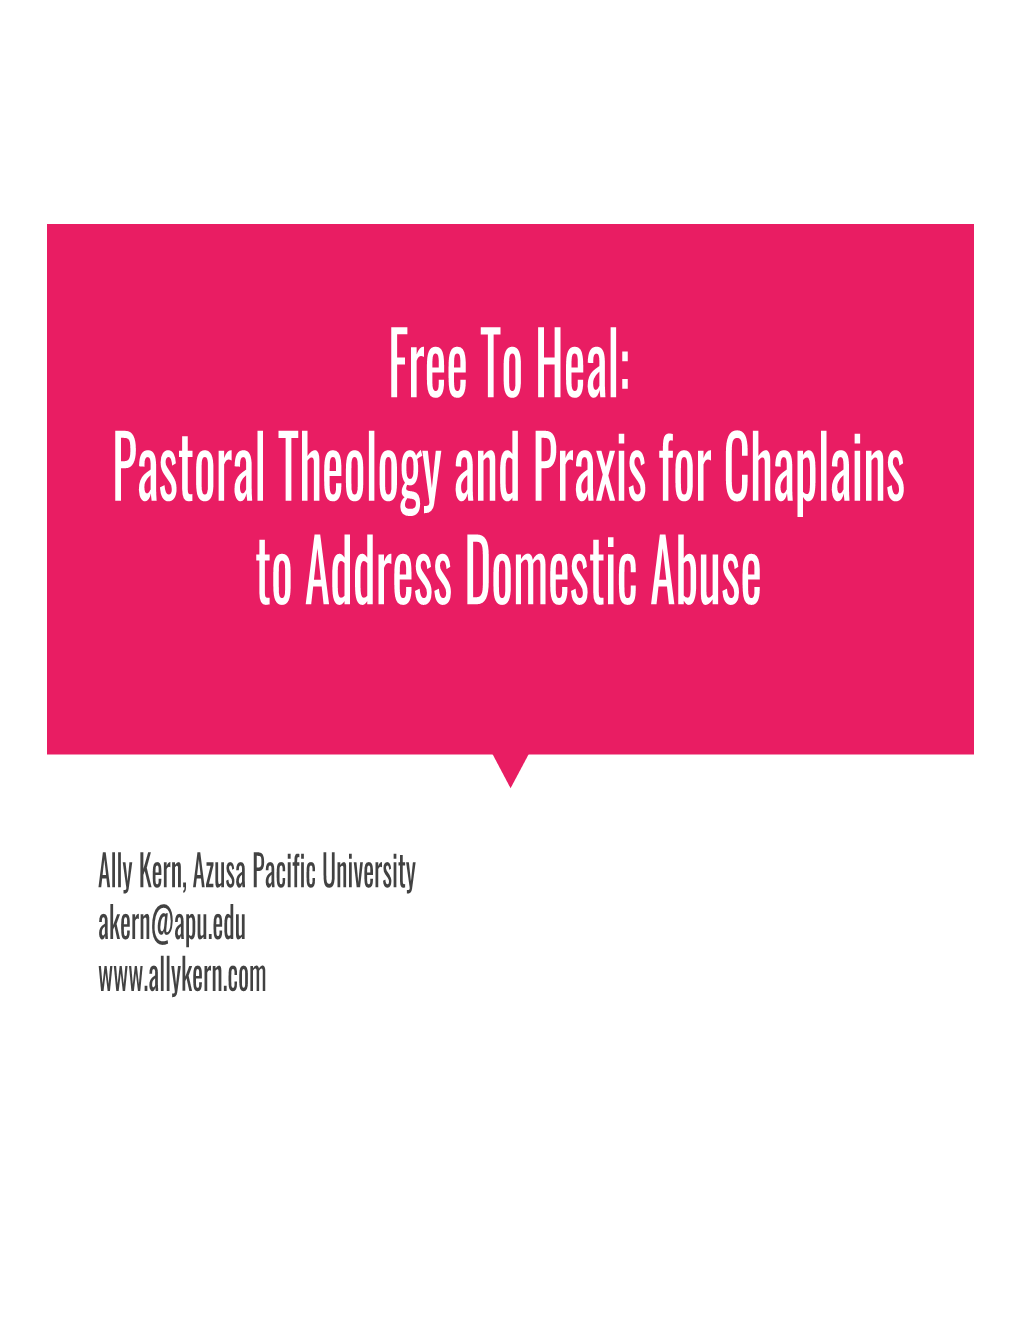 Pastoral Theology and Praxis for Chaplains to Address Domestic Abuse